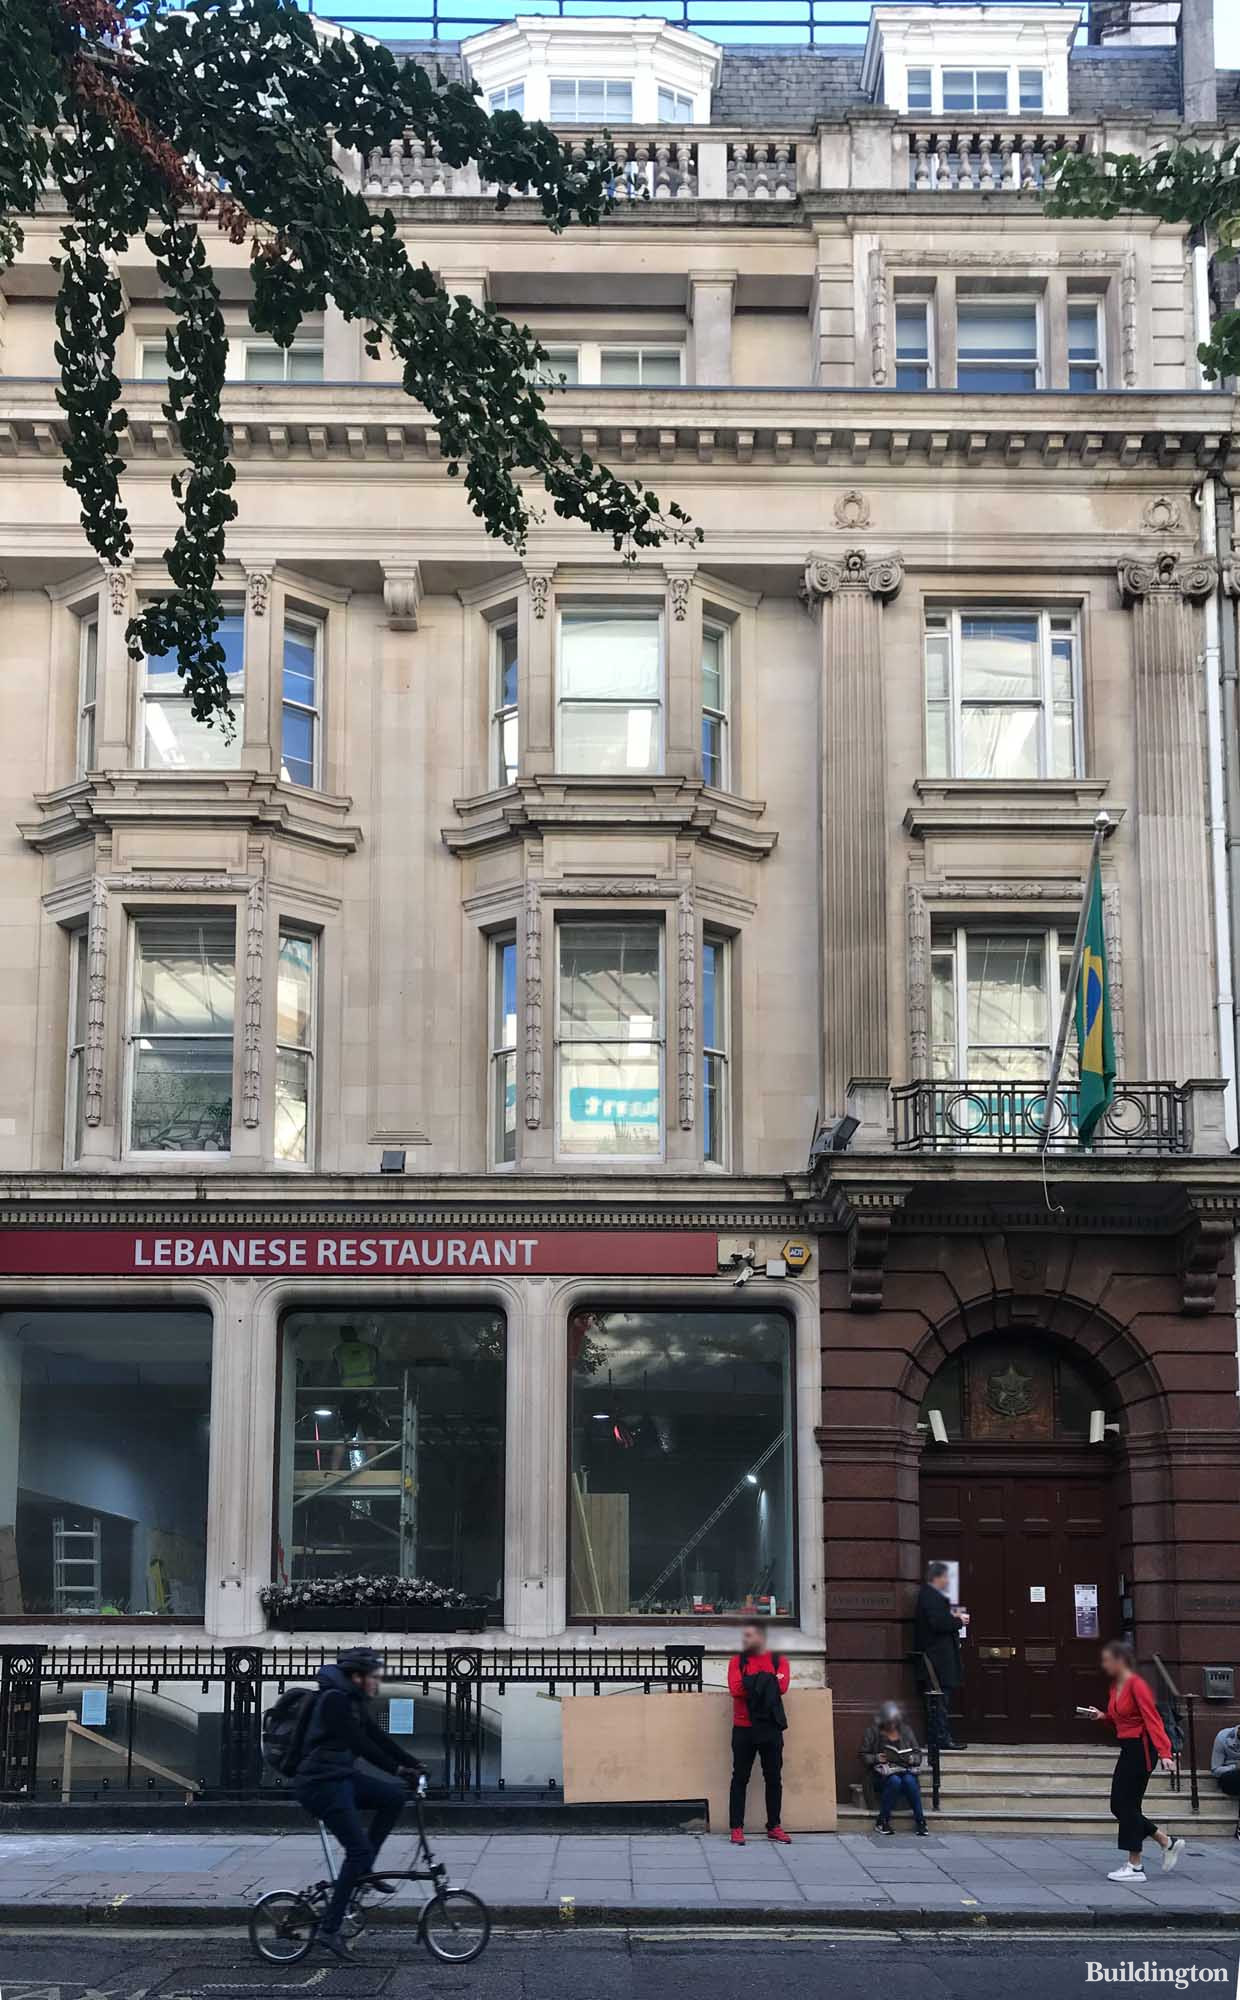 Lebanese restaurant Maroush next to the entrance to Consulate General‎ of Brazil in London (Consulado-Geral do Brasil em Londres) building at 3-4 Vere Street off Oxford Street in Marylebone, London W1.